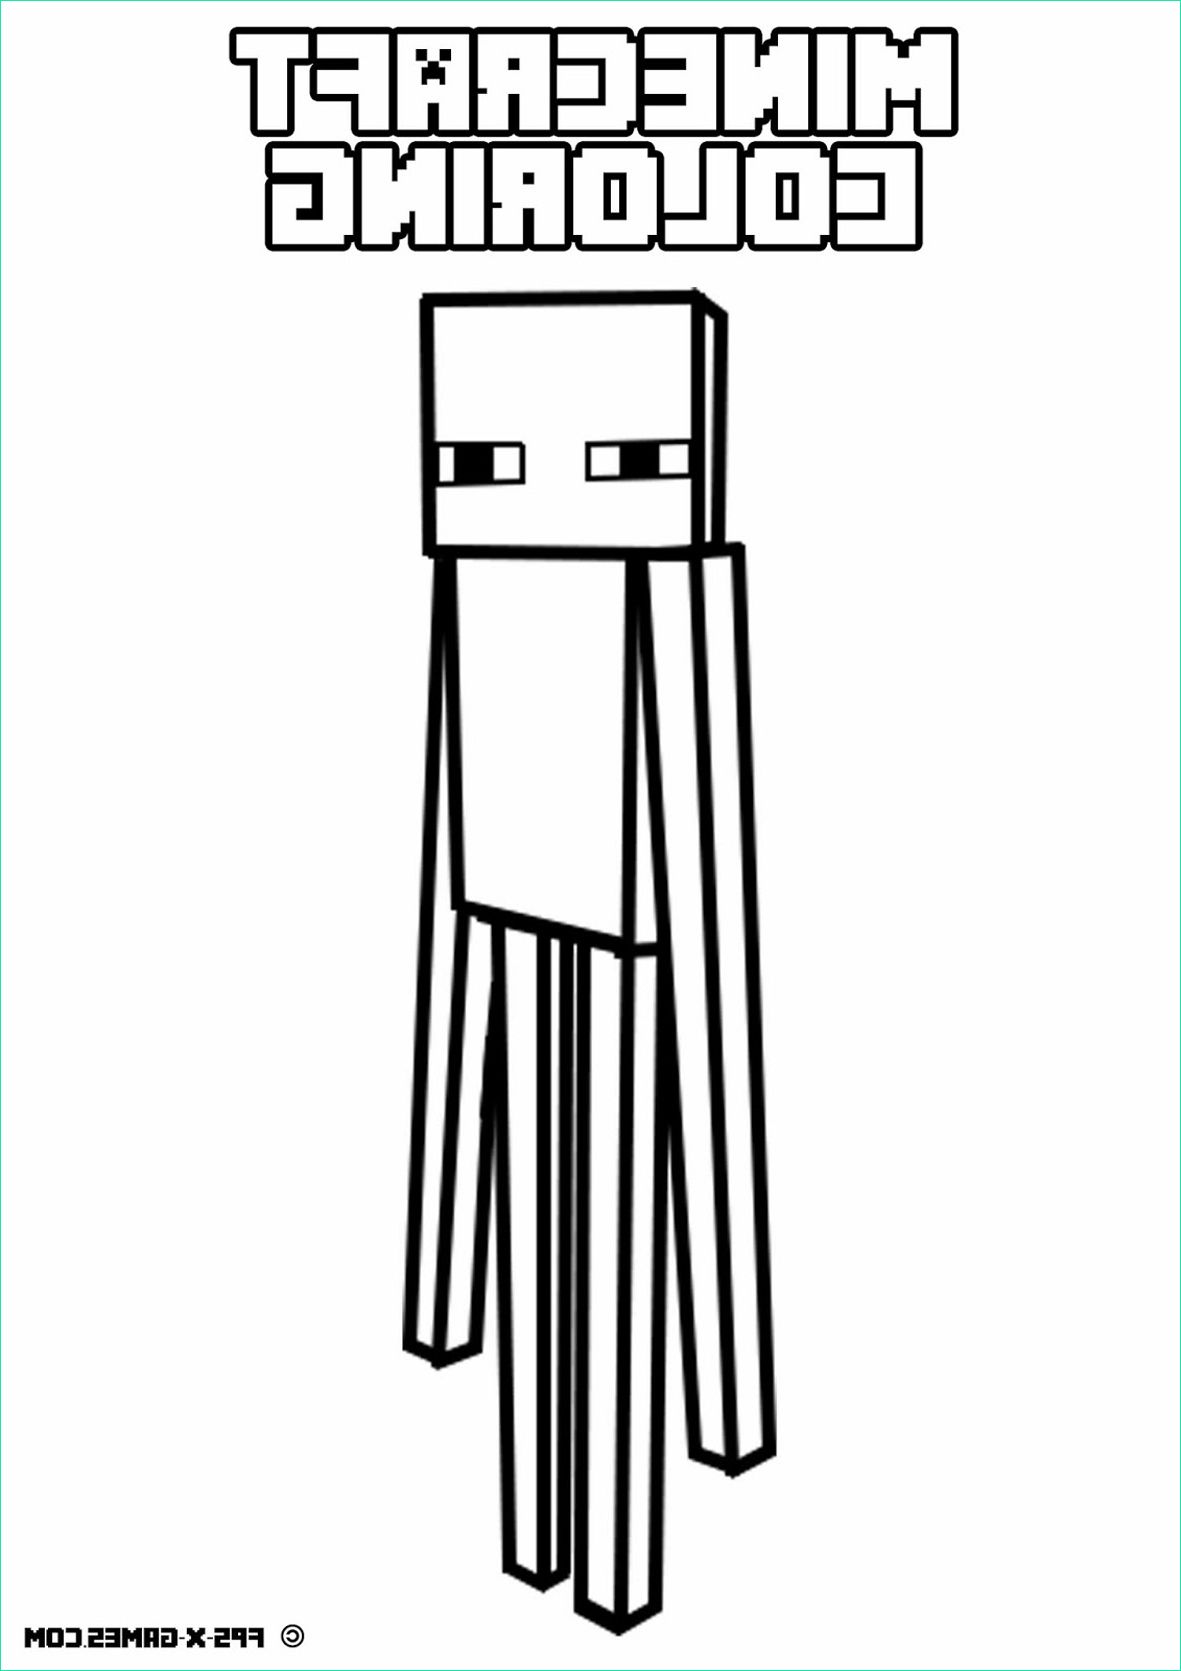 image=kids minecraft coloring page drawing inspired by minecraft 8 1